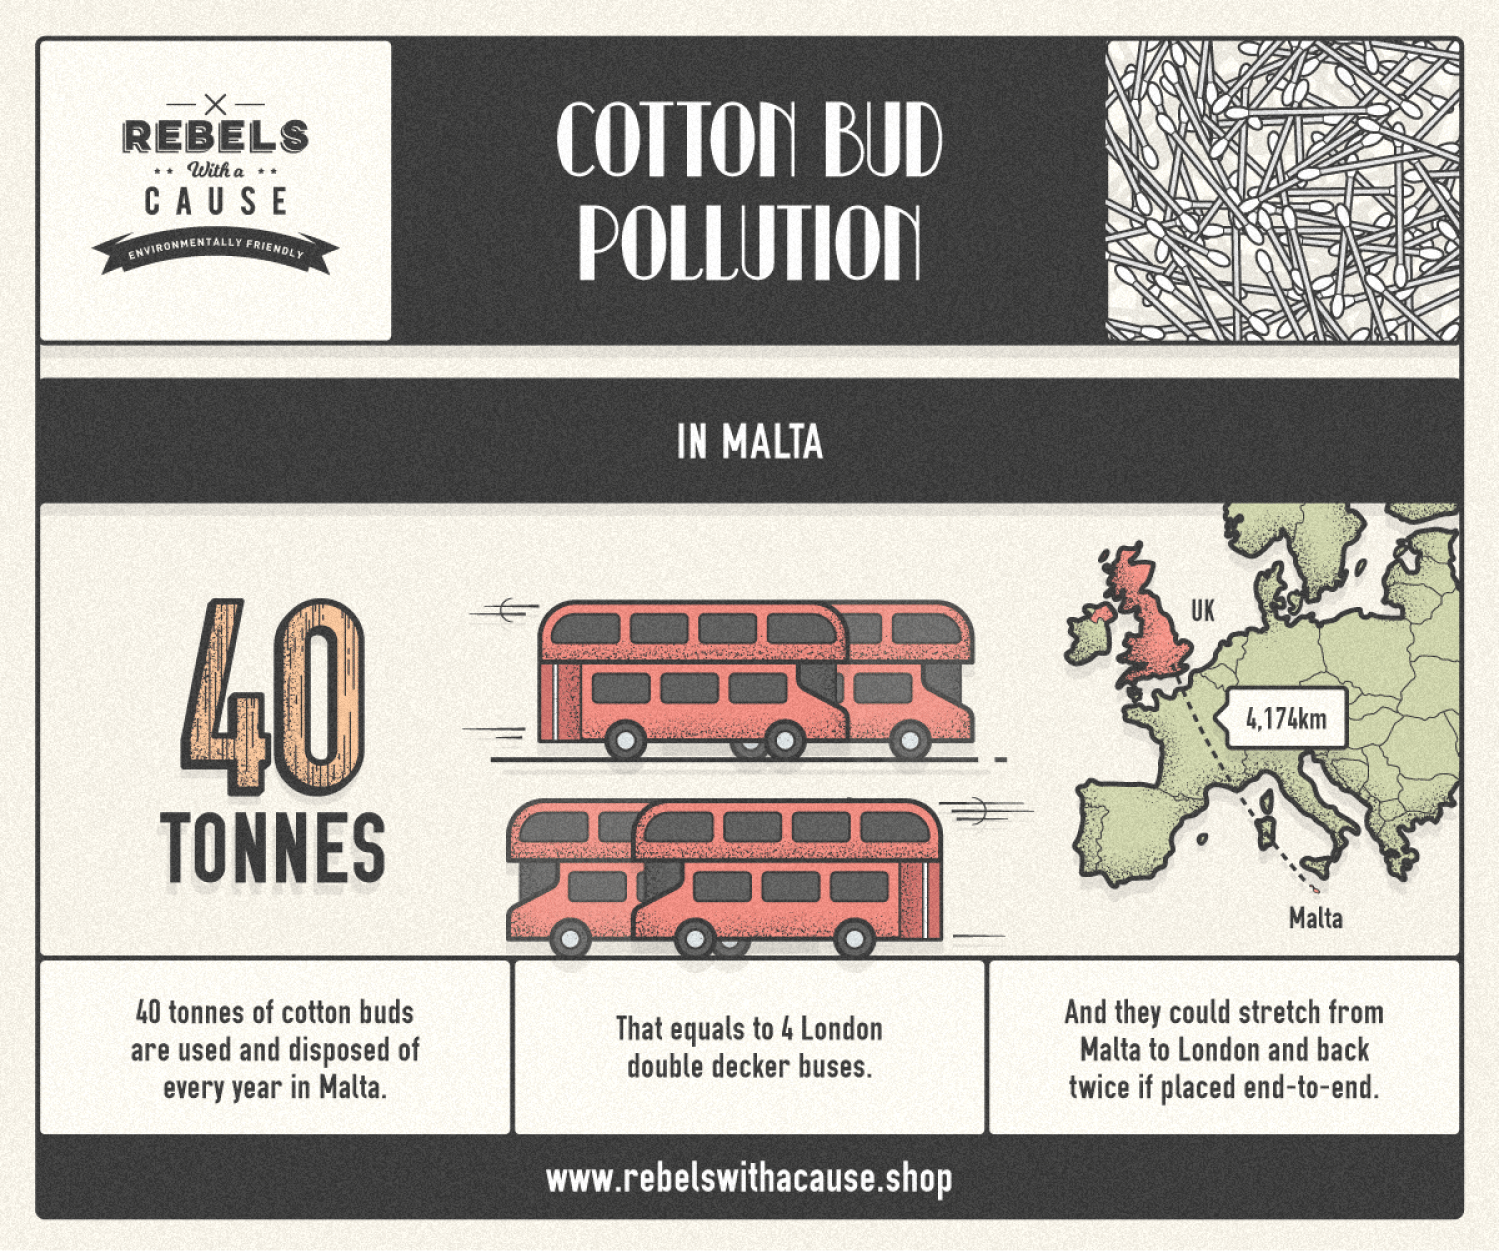 rebels-with-a-cause-cotton-bud-waste